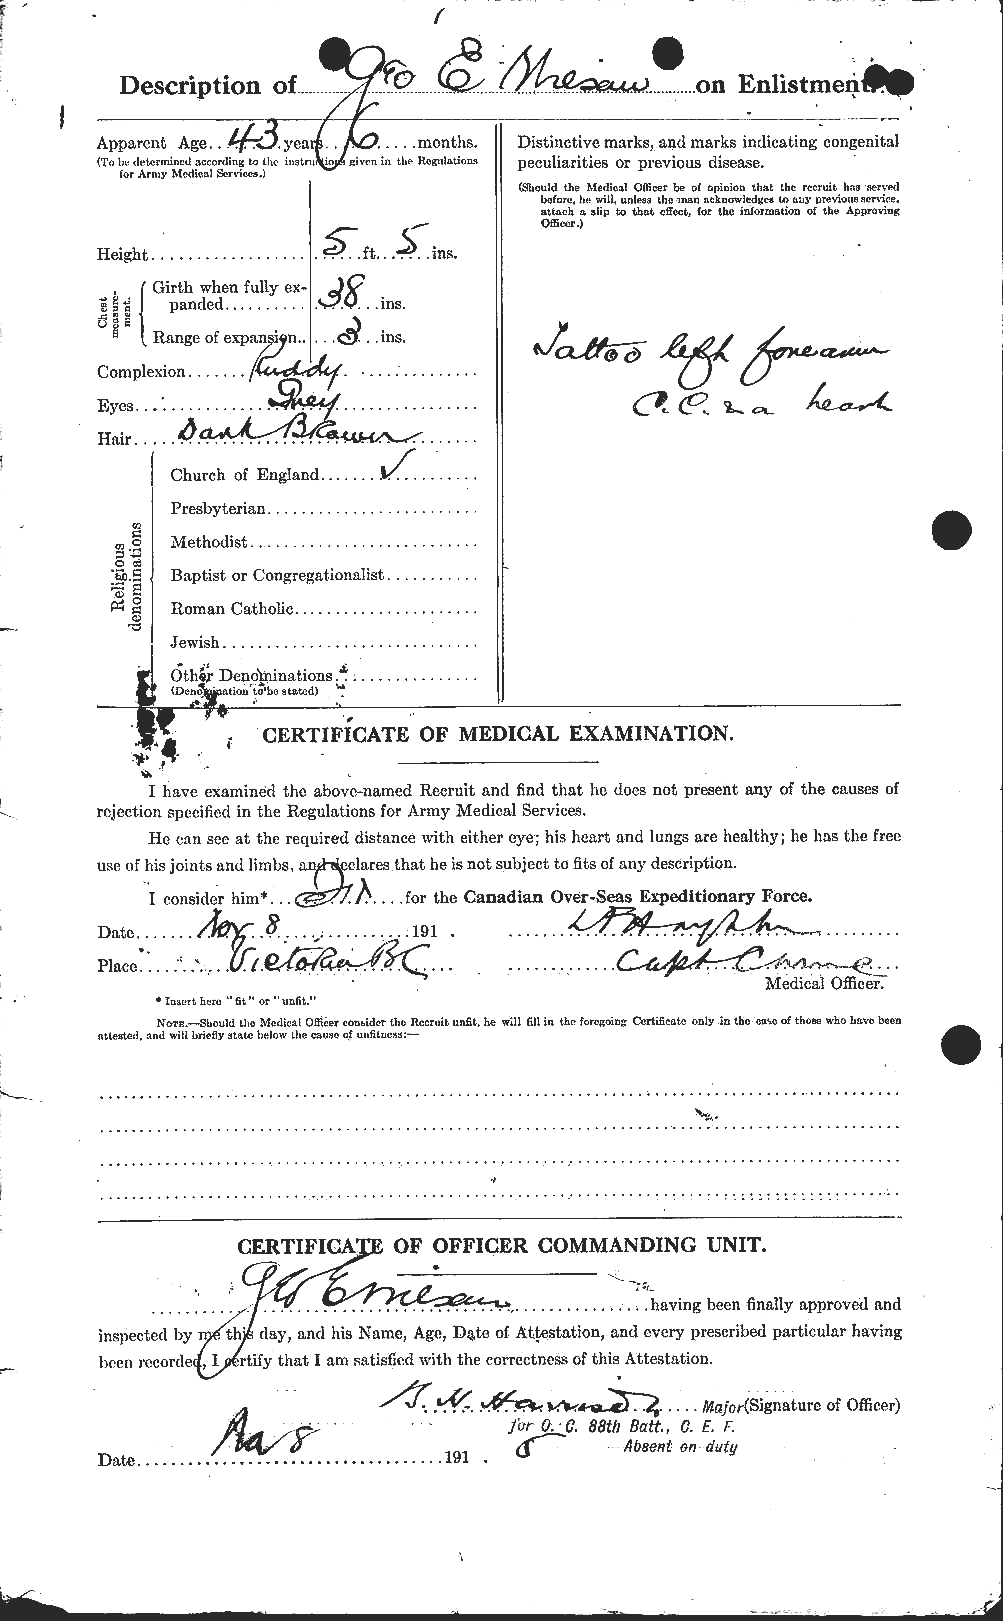 Personnel Records of the First World War - CEF 679272b